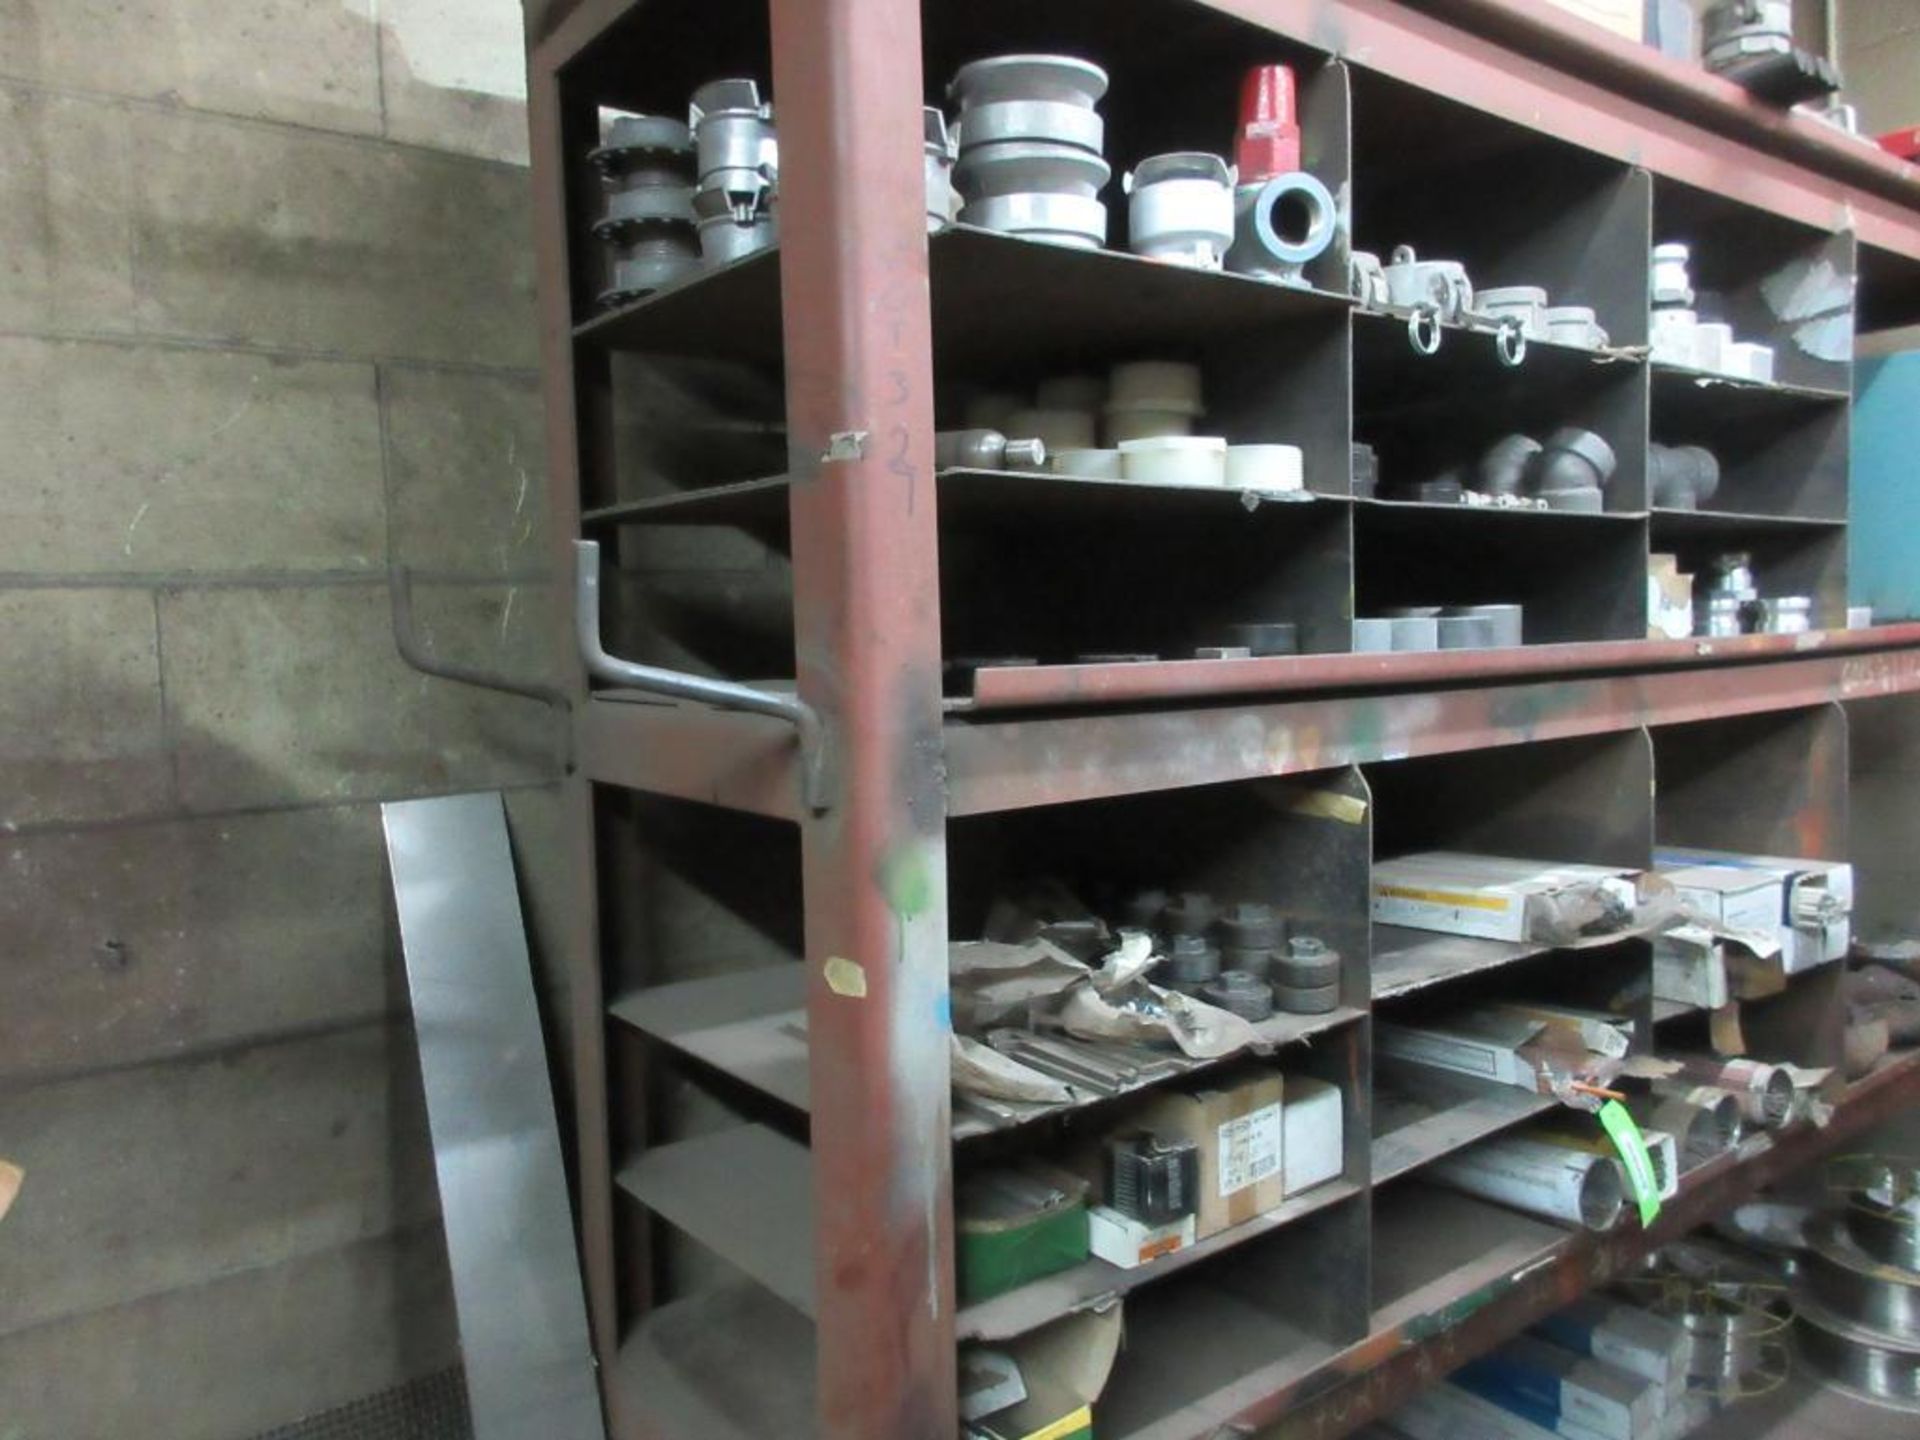 CONTENTS OF WEST TOOL ROOM EXCLUDING 6 LOTTED ITEMS (124, 125, 127, 127, 155, 156), INCLUDES FASTENE - Image 9 of 9